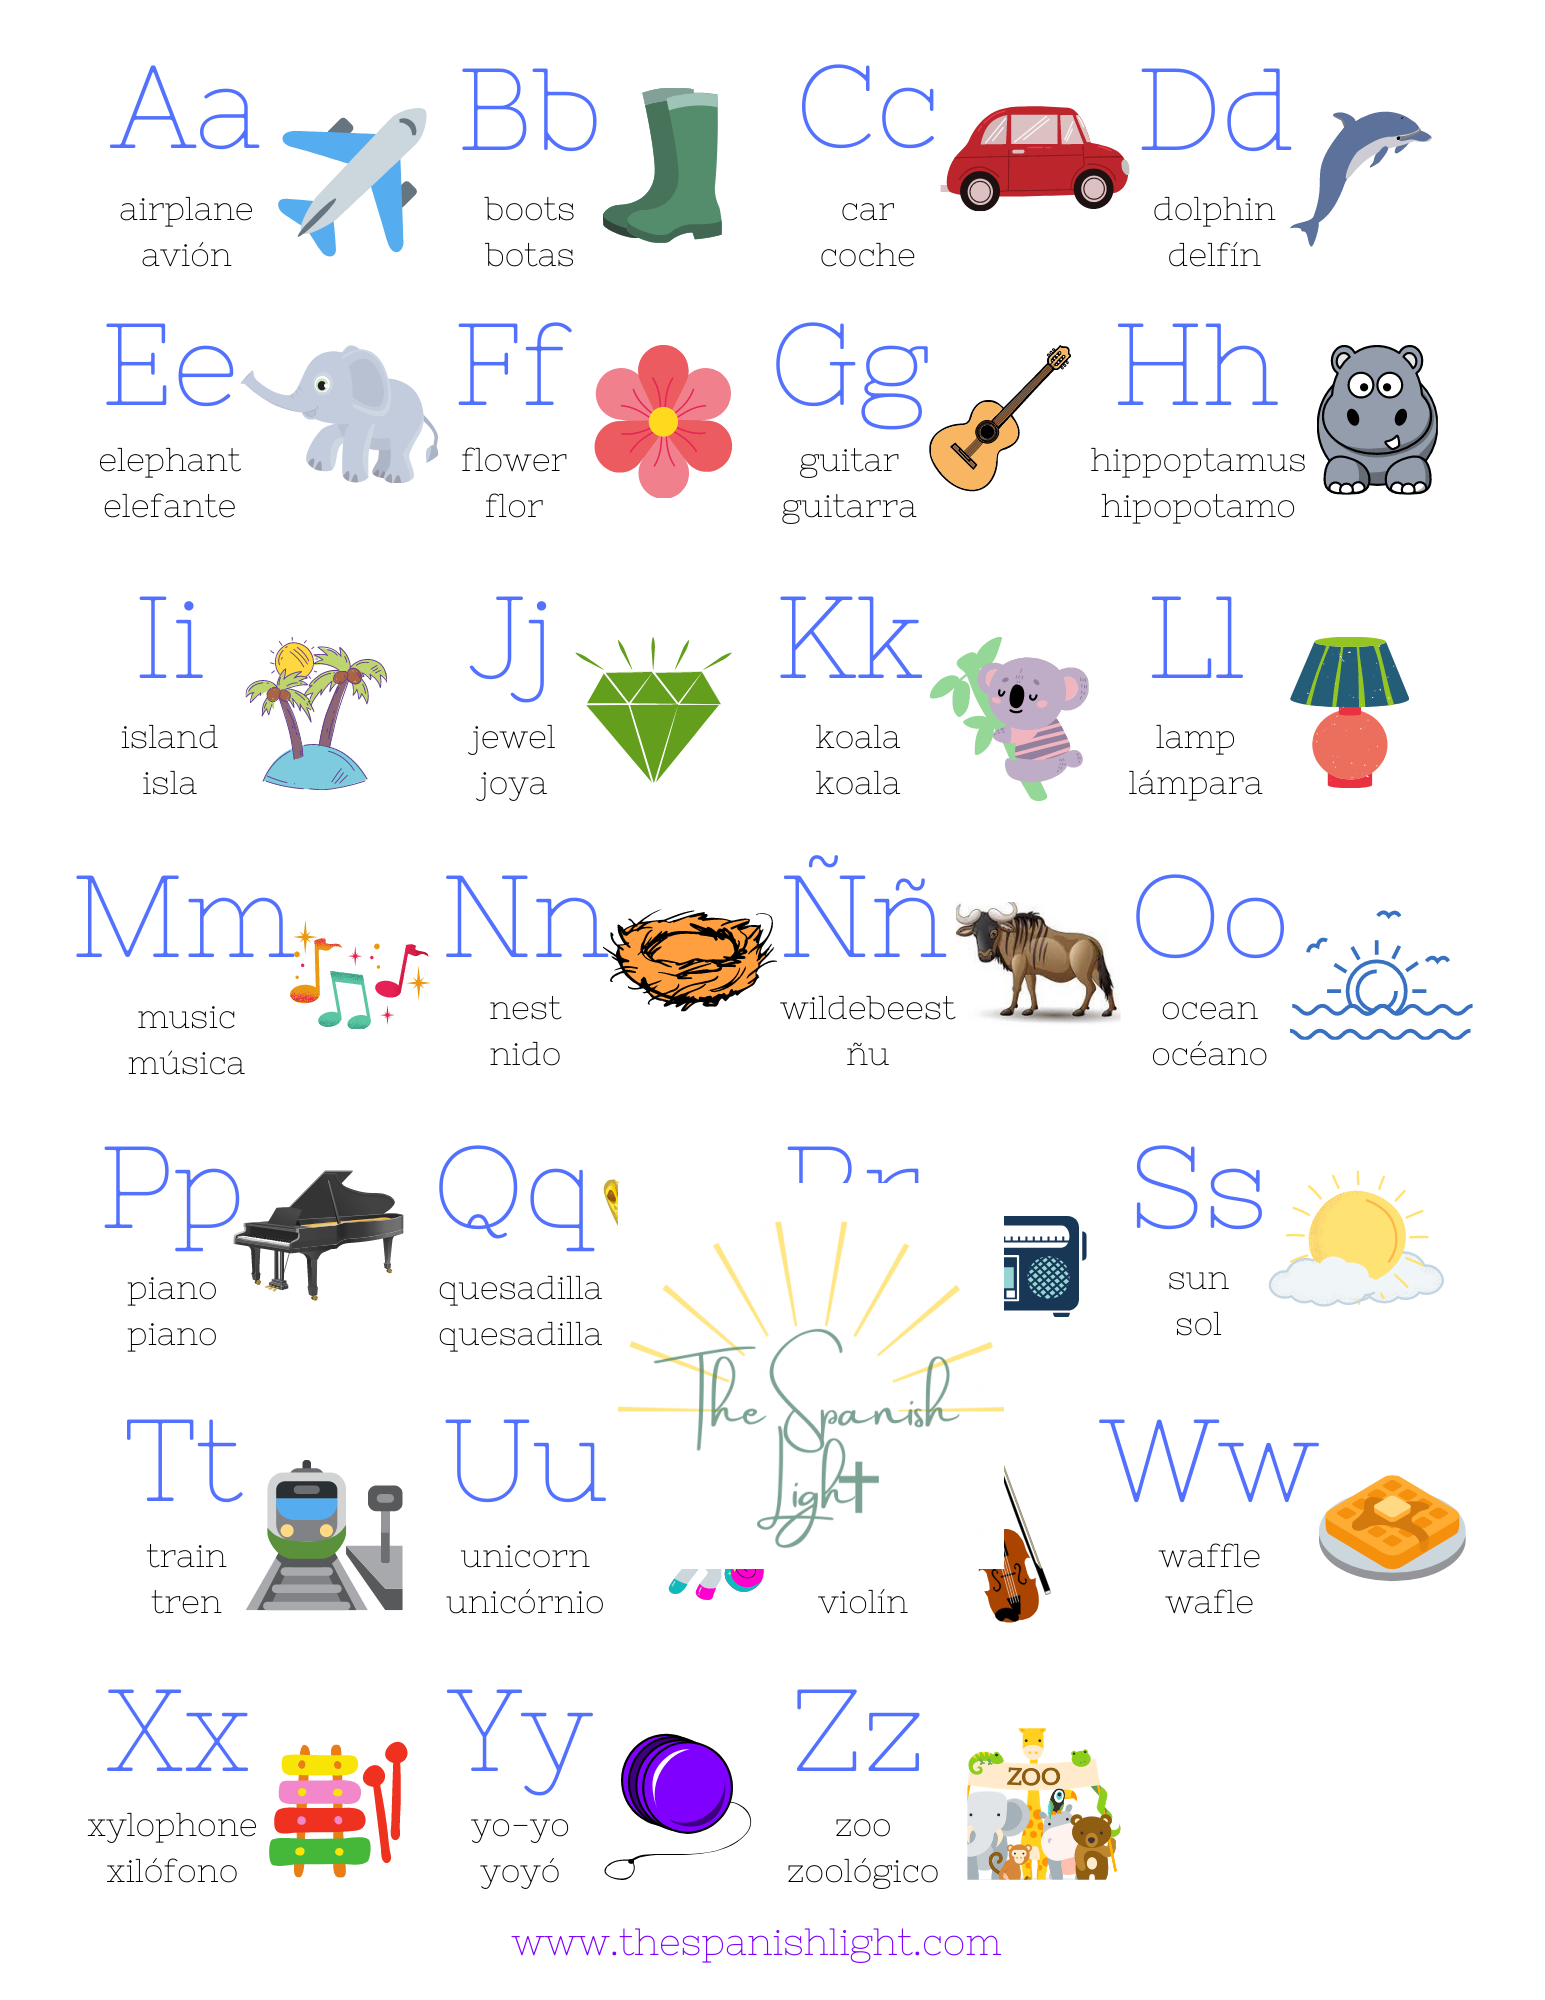 Alphabet Poster in Spanish and English - The Spanish Light